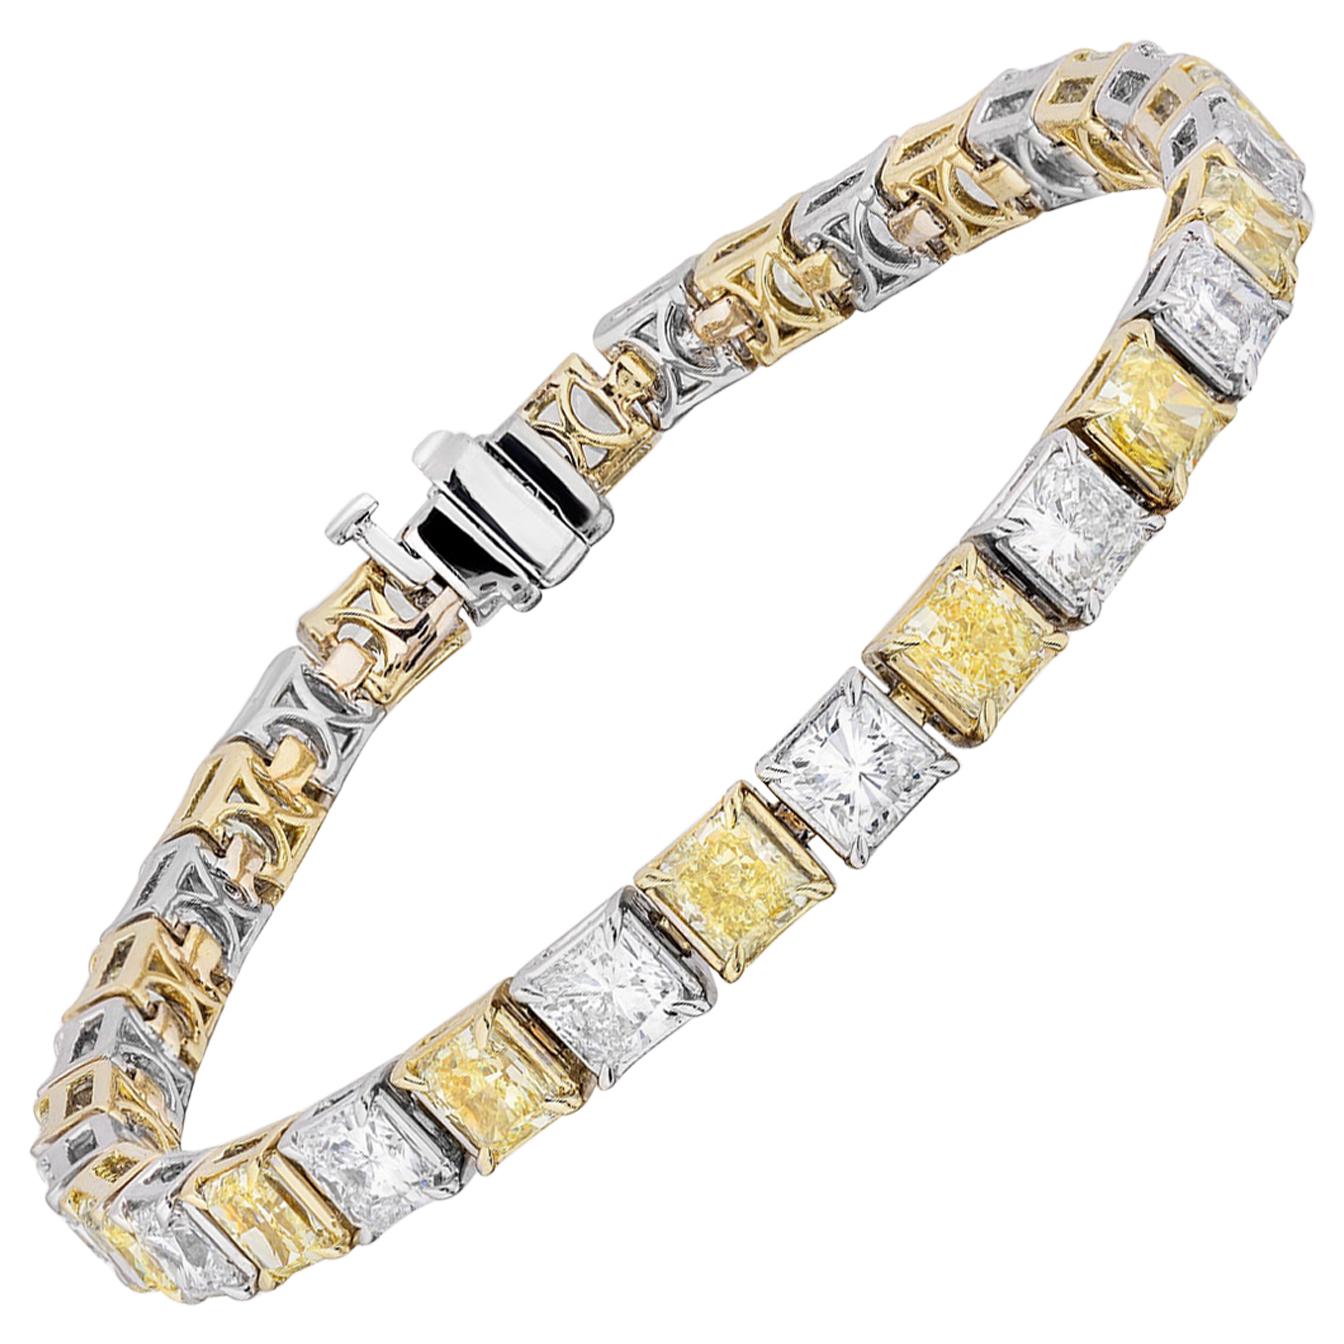 16.55 Carat Eadiant Shaped Yellow and White Diamond Bracelet For Sale